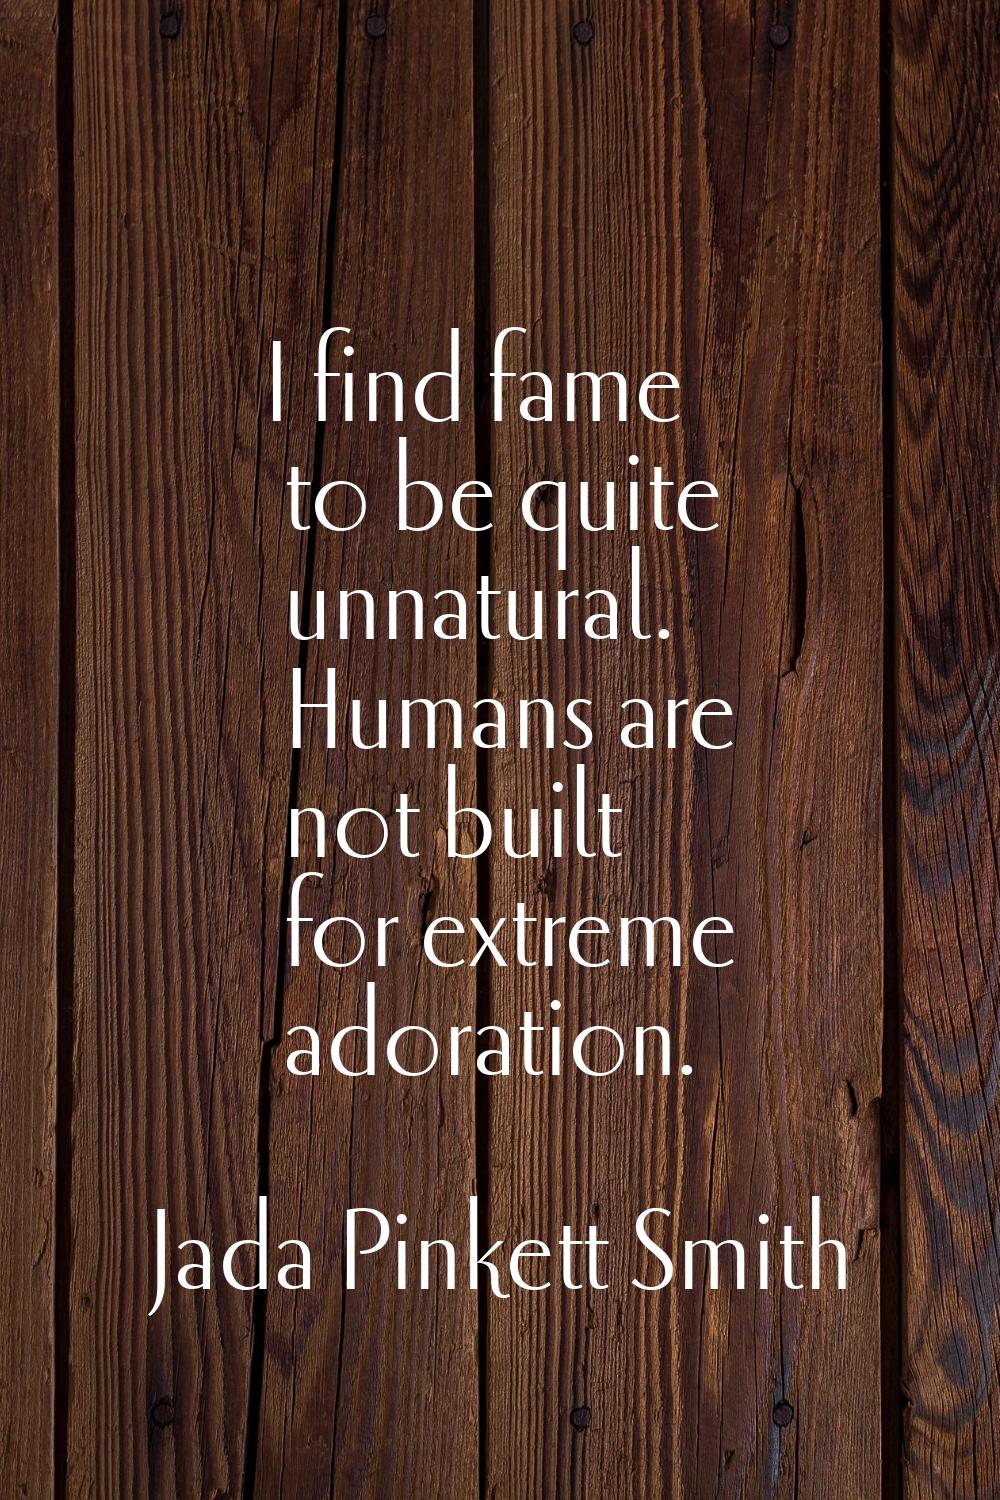 I find fame to be quite unnatural. Humans are not built for extreme adoration.